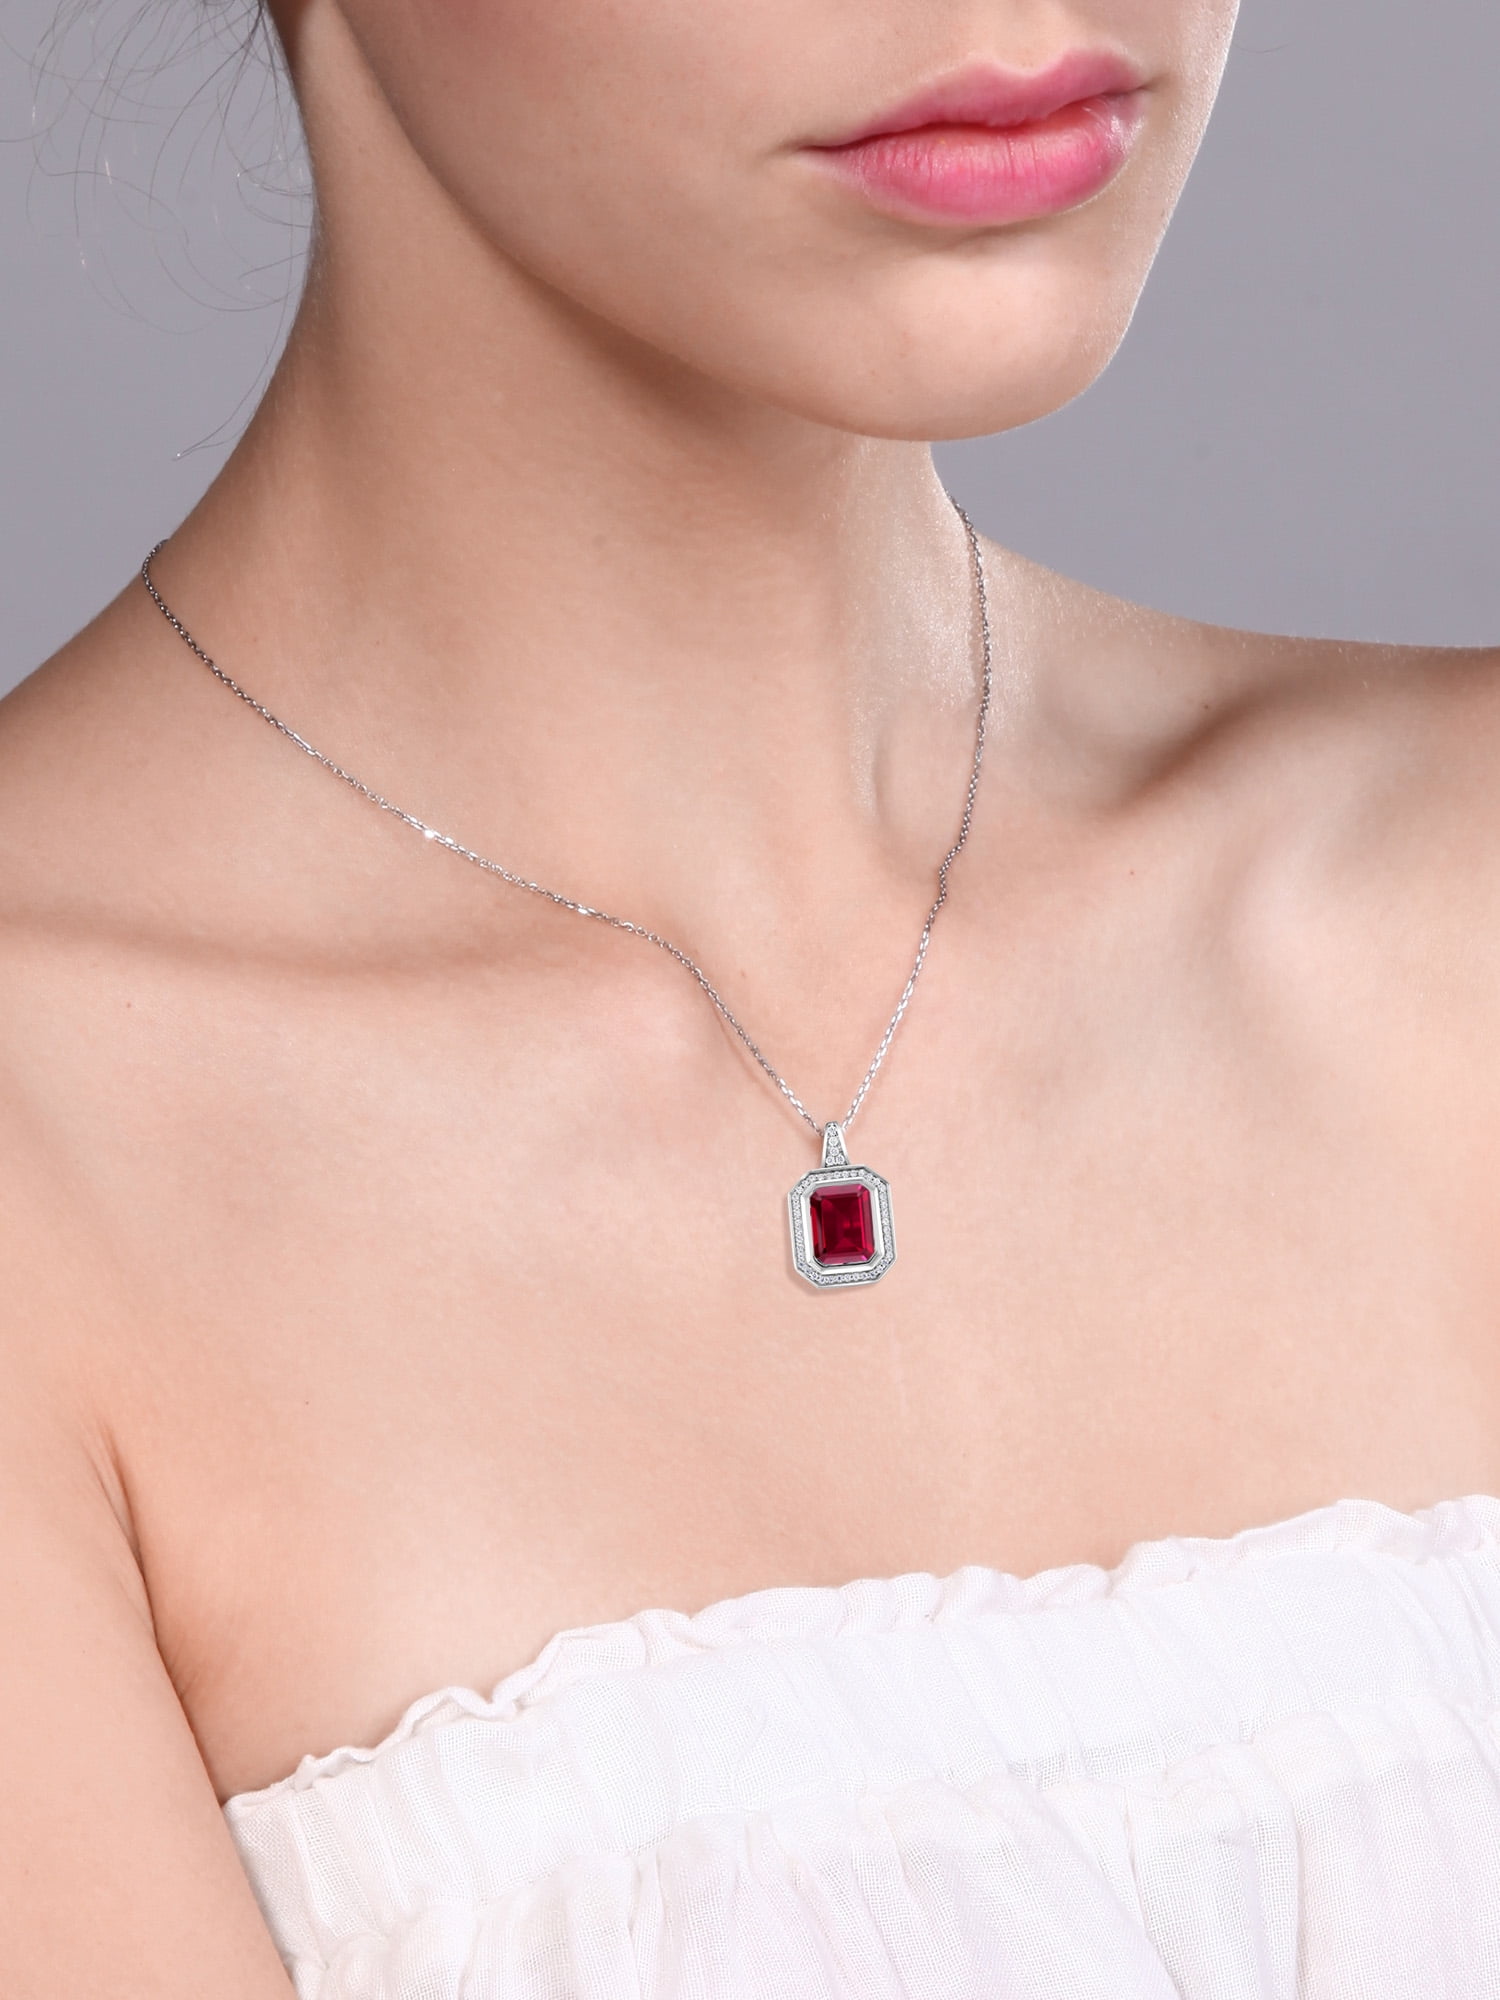 Gem Stone King 925 Sterling Silver Red Created Ruby Pendant